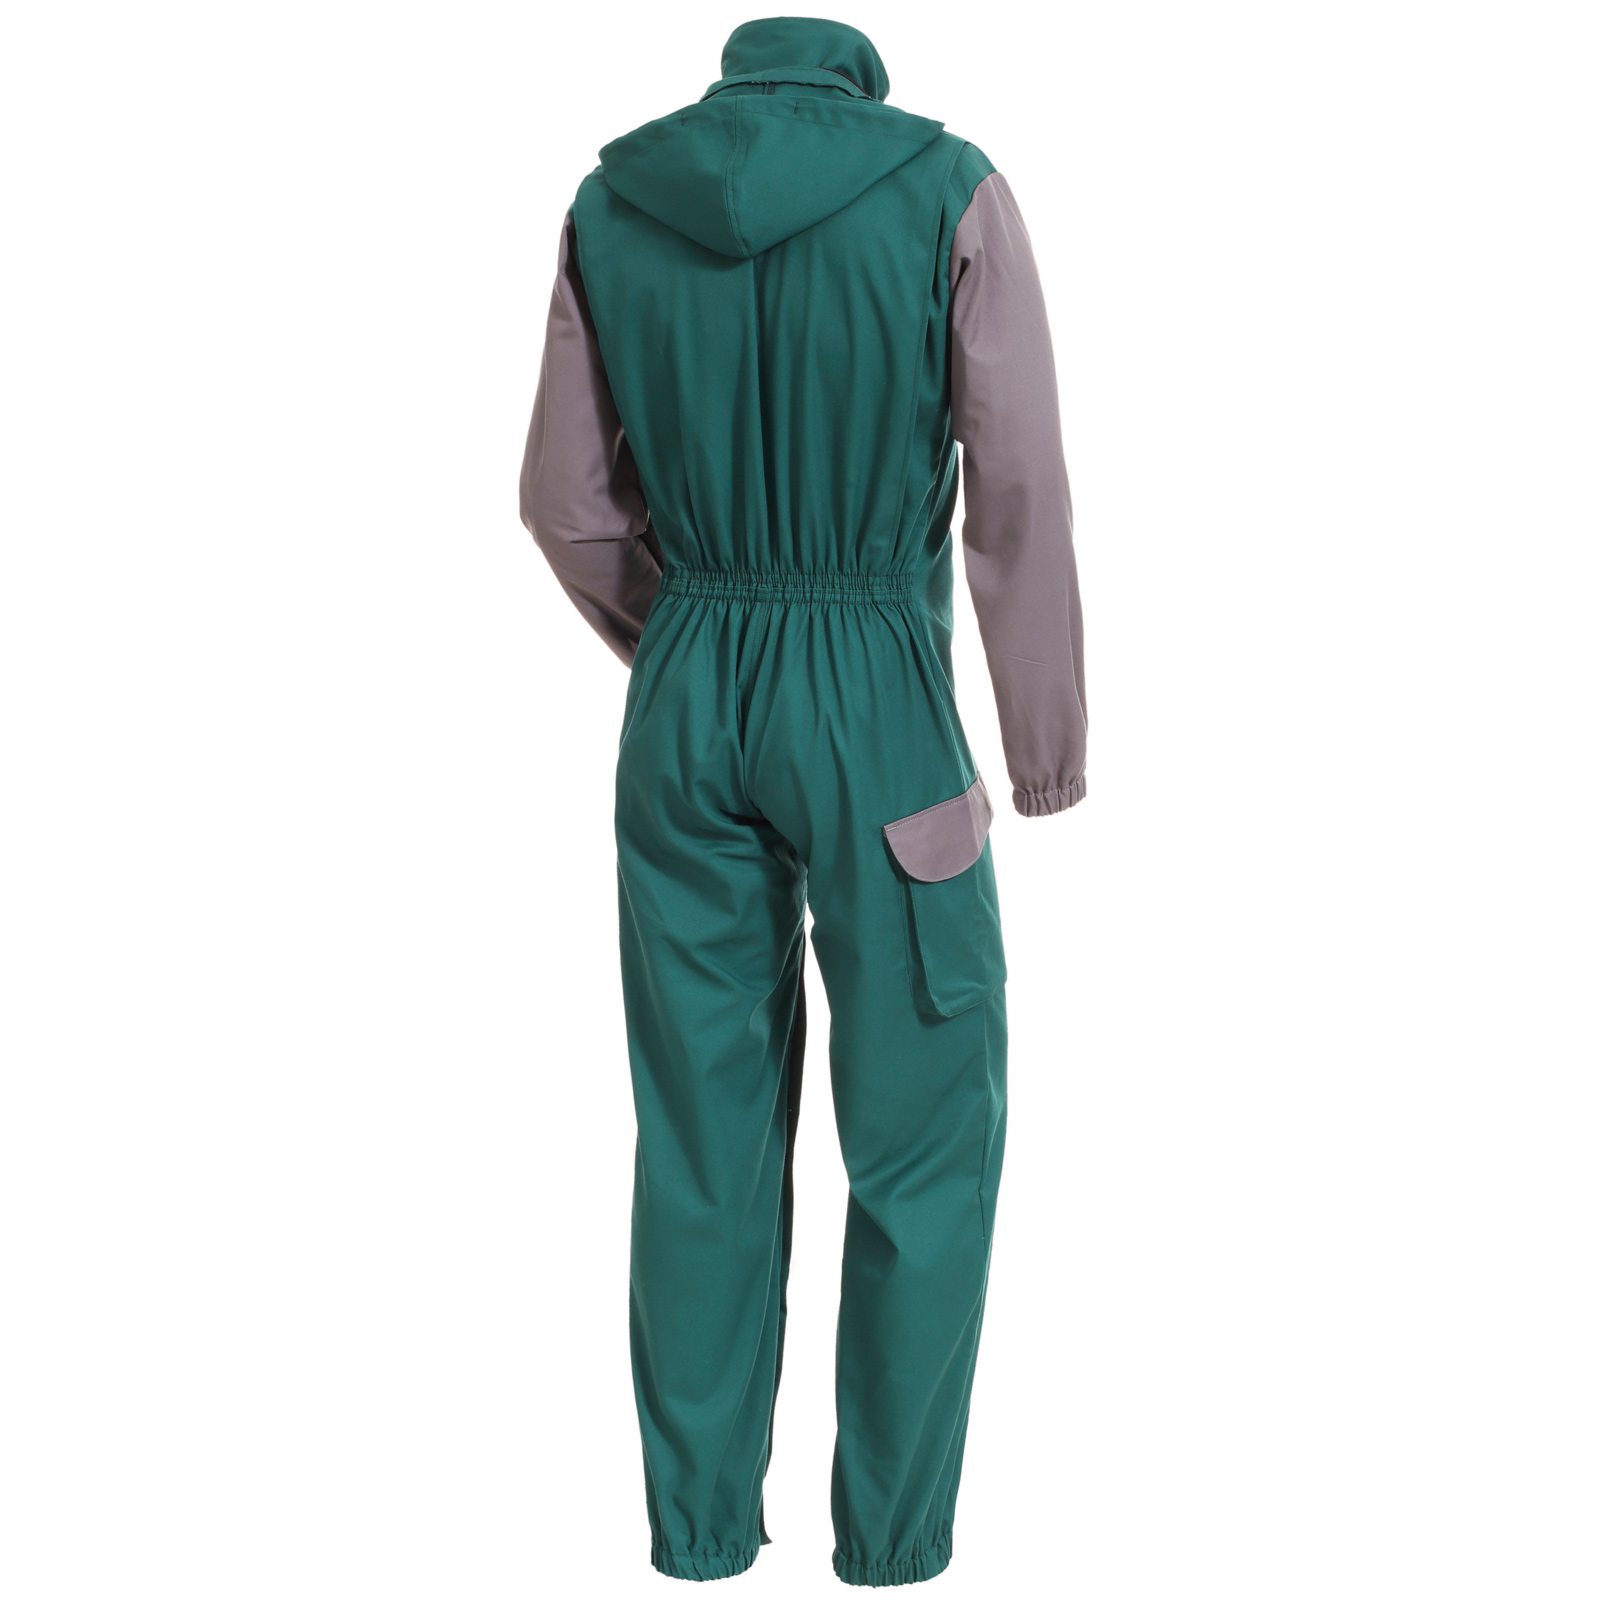 Plant protection overall Aegis green-grey